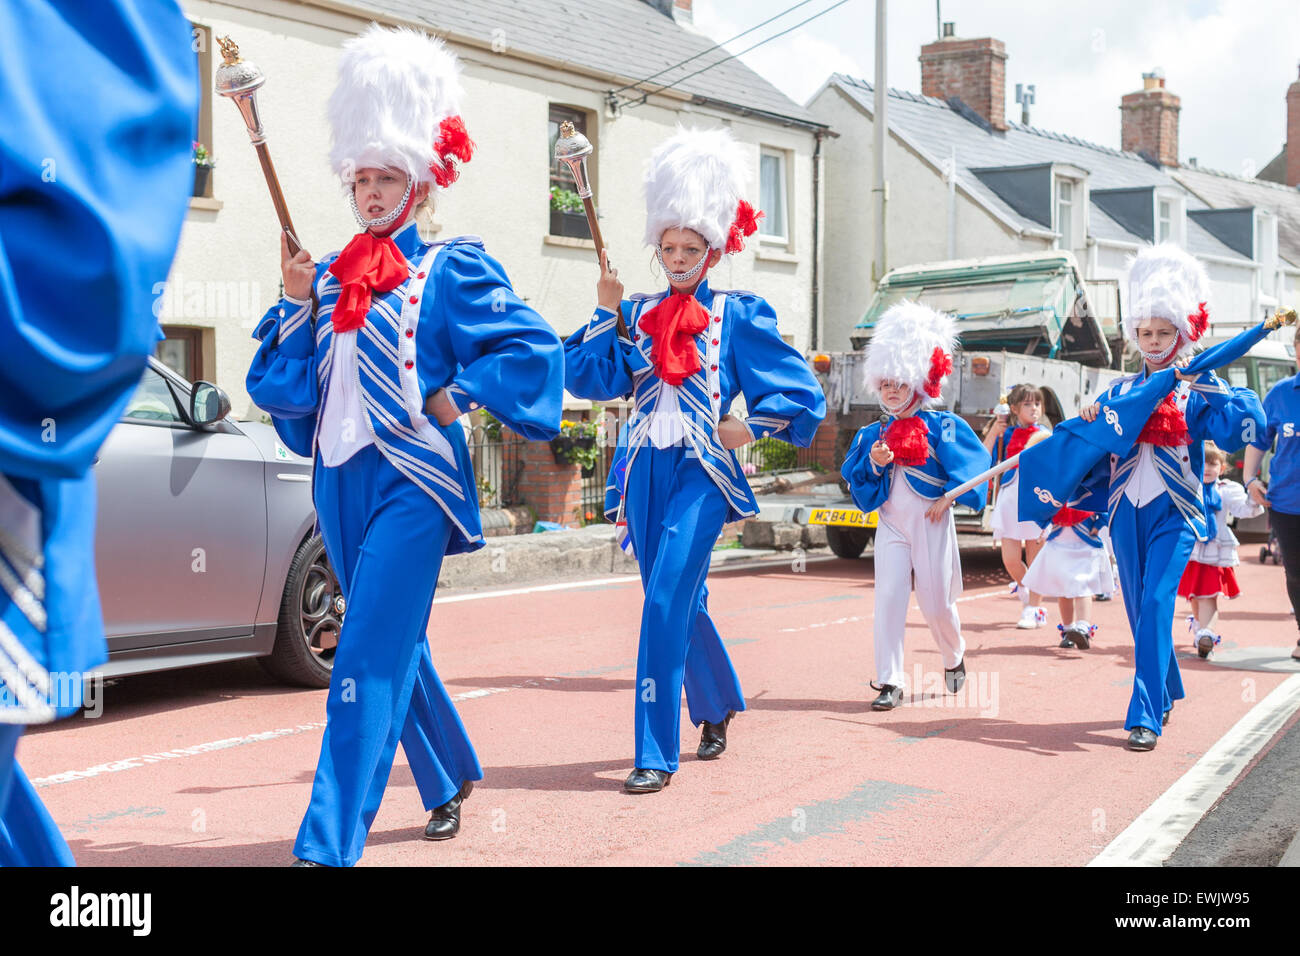 Marching band at St Clears Carnival June 2015 in Pembrokeshire Wales.  Town parade. Stock Photo